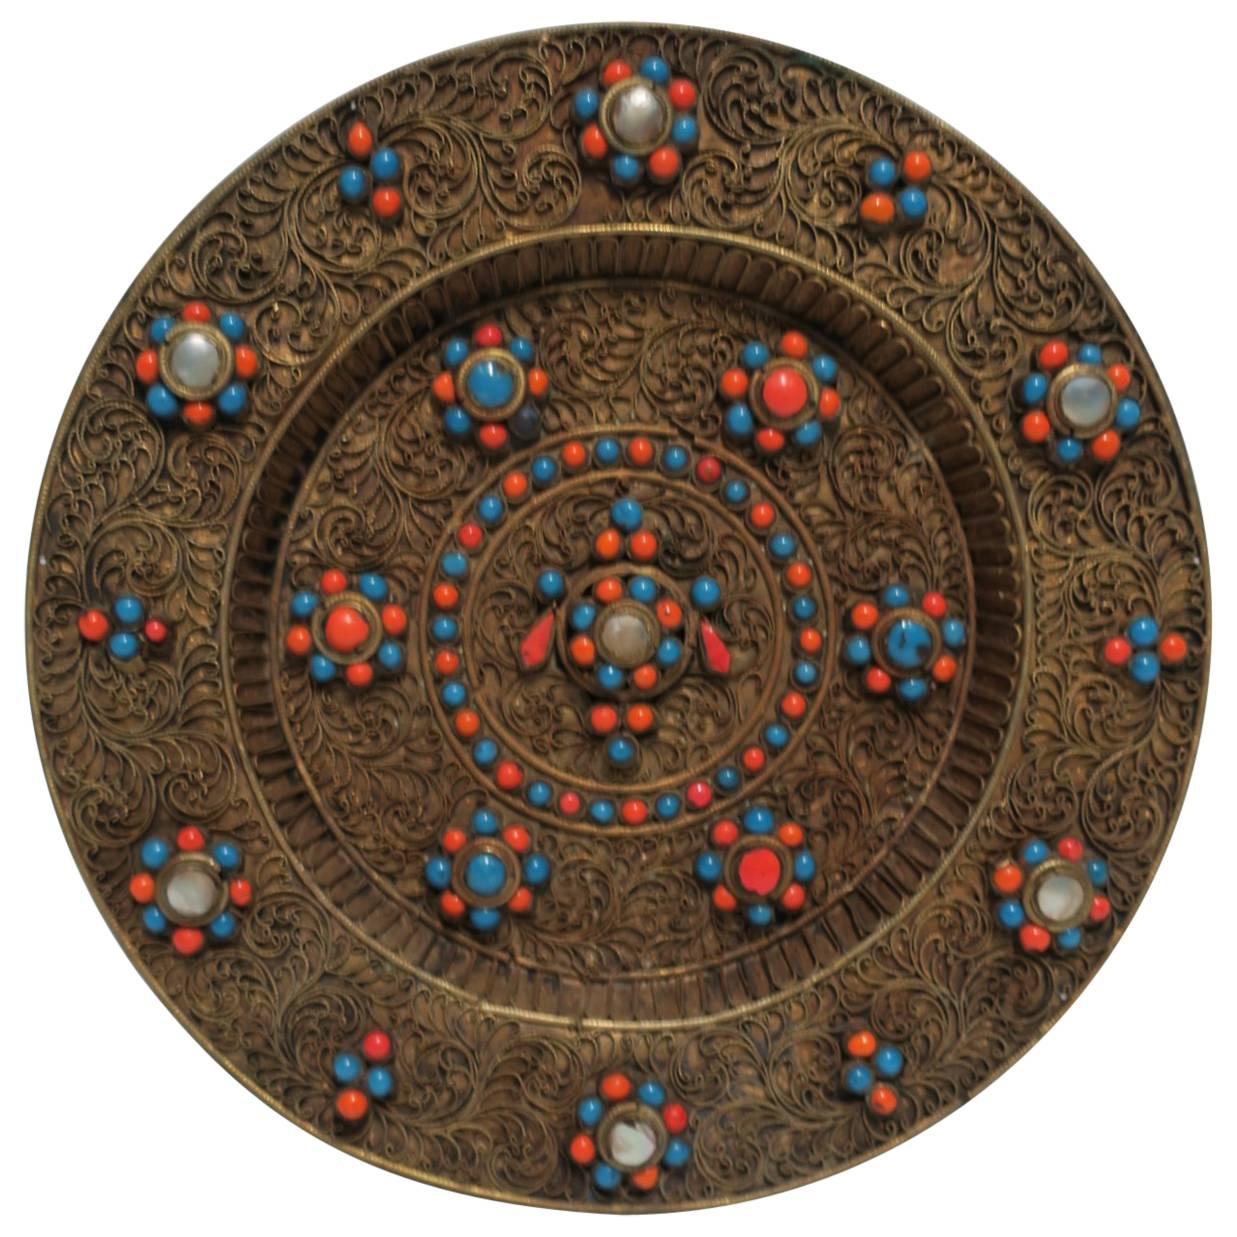 Brass and Mother of Pearl Decorative Wall Plate, Nepalese